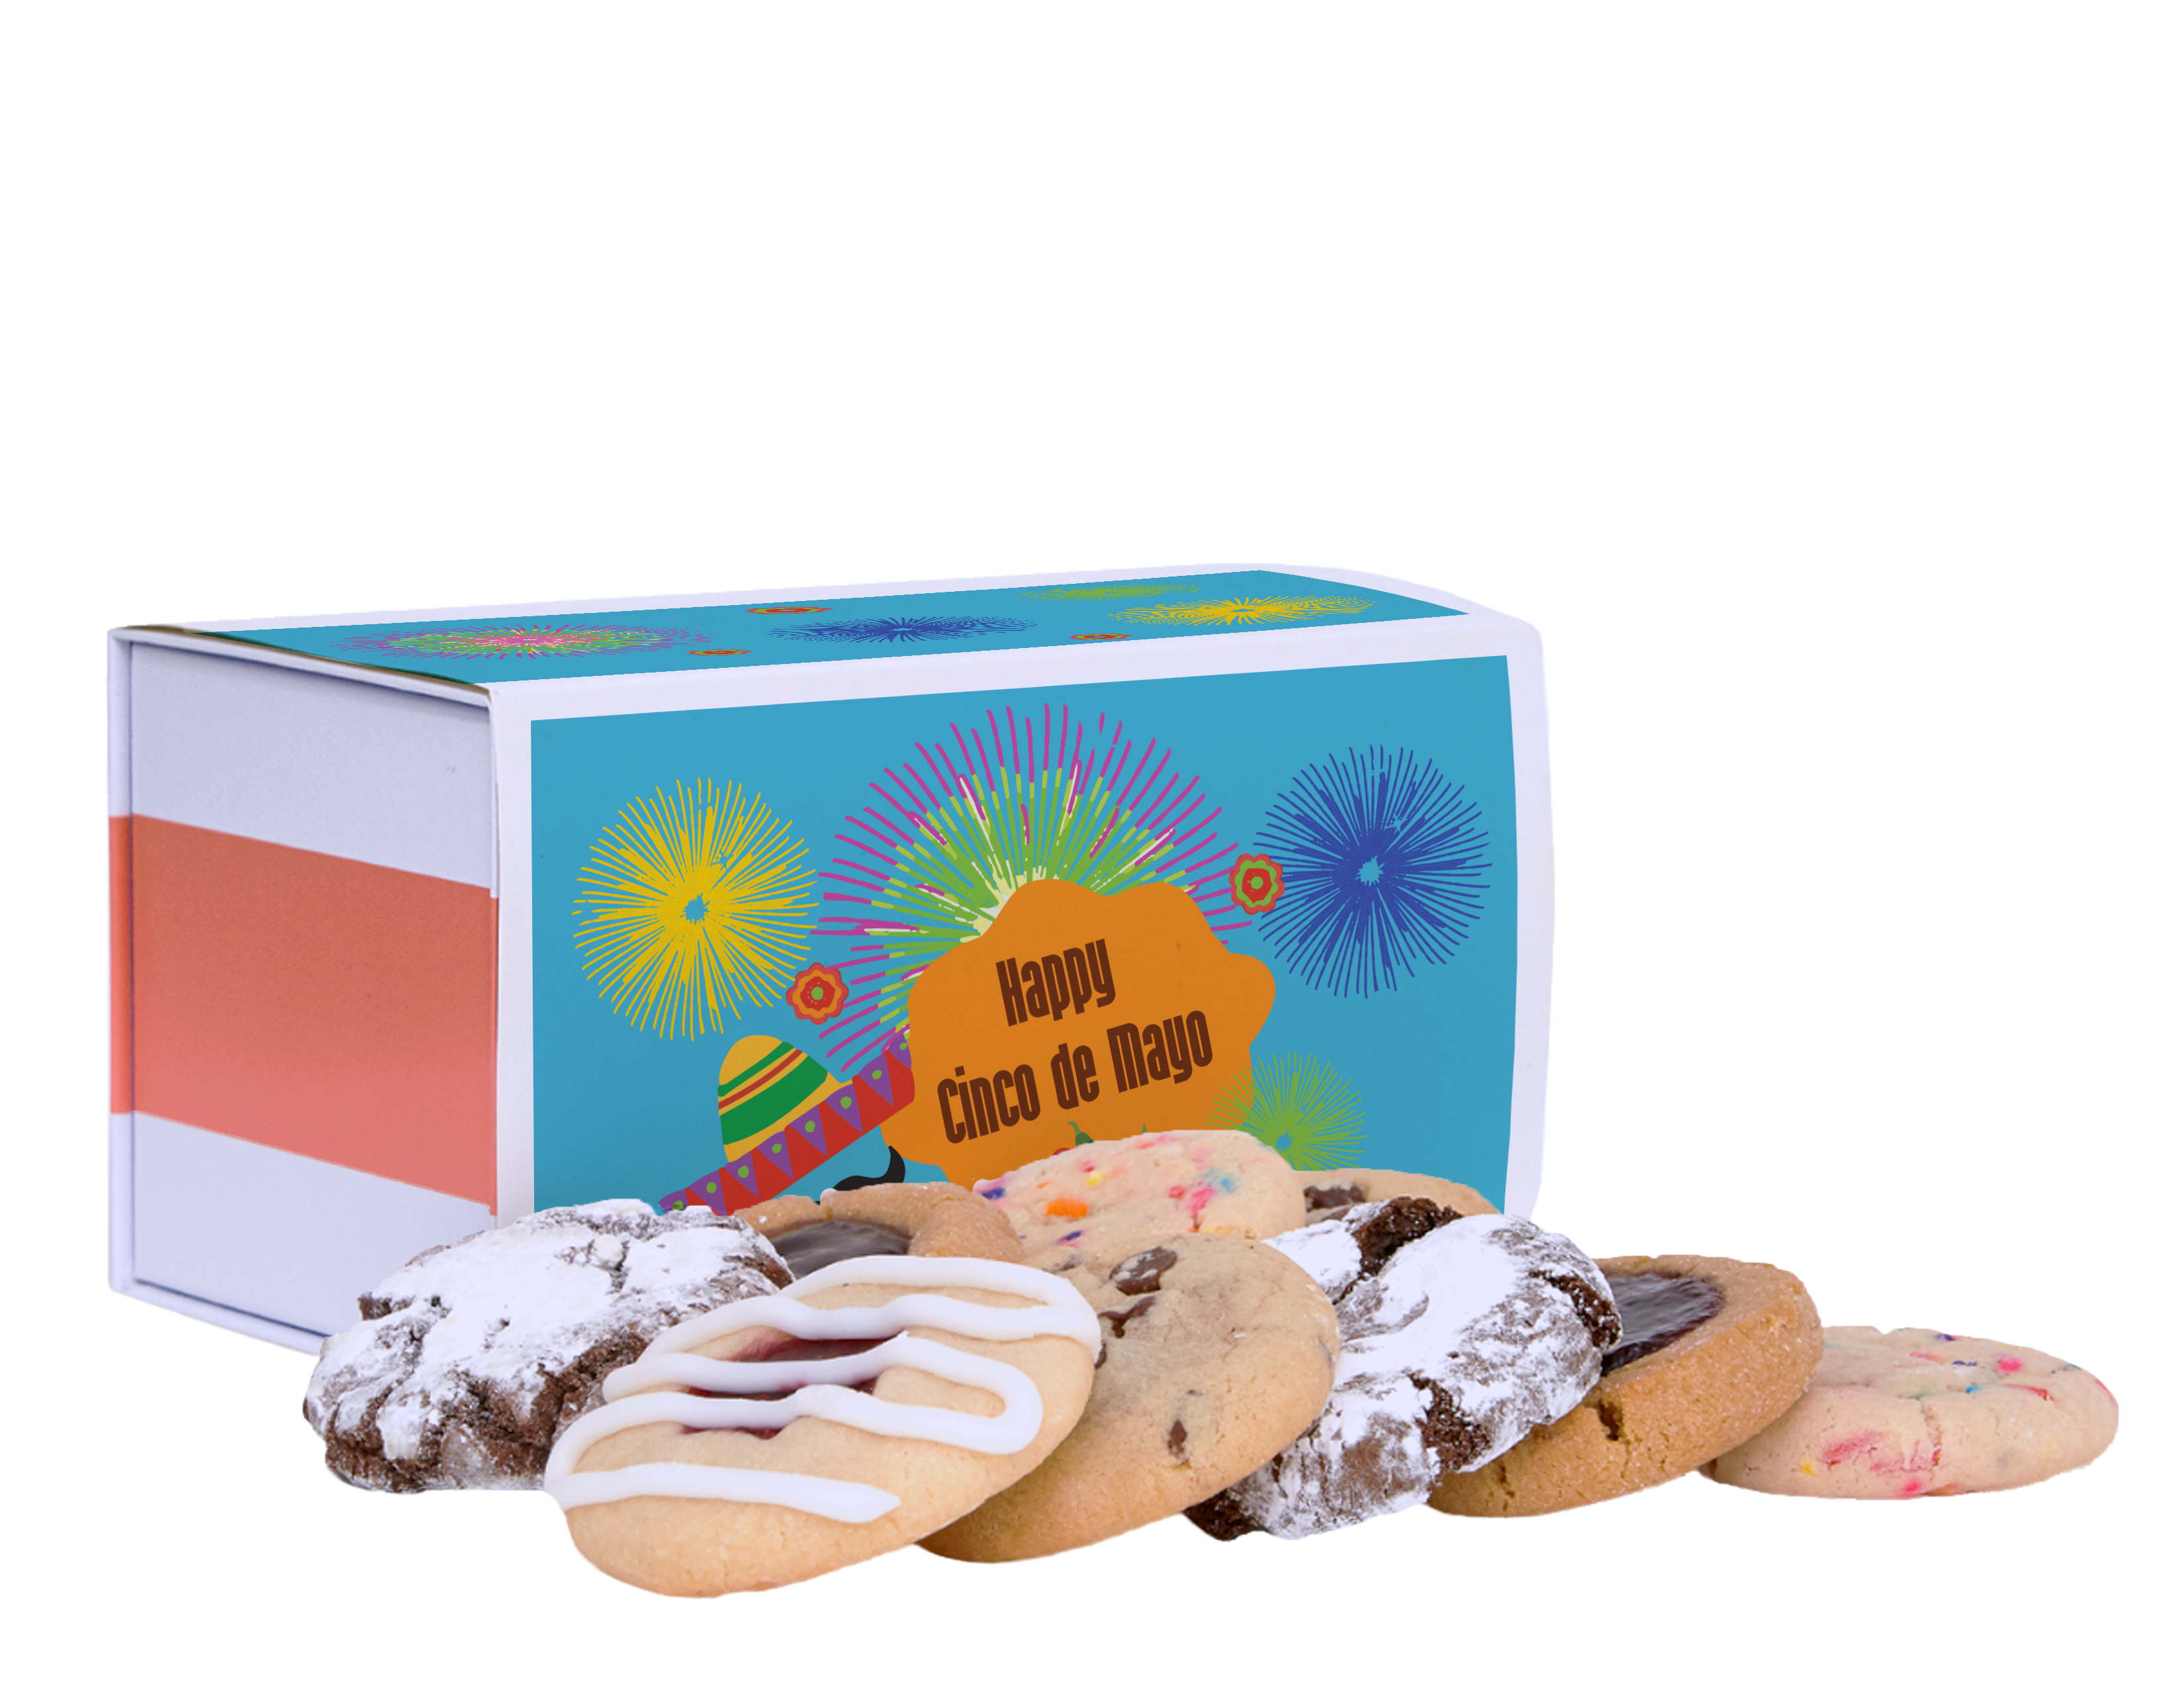 Cinco De Mayo Gifts | Cinco De Mayo | Cinco De Mayo Cookies | Corporate Gifts | Employee gifting | client gifting